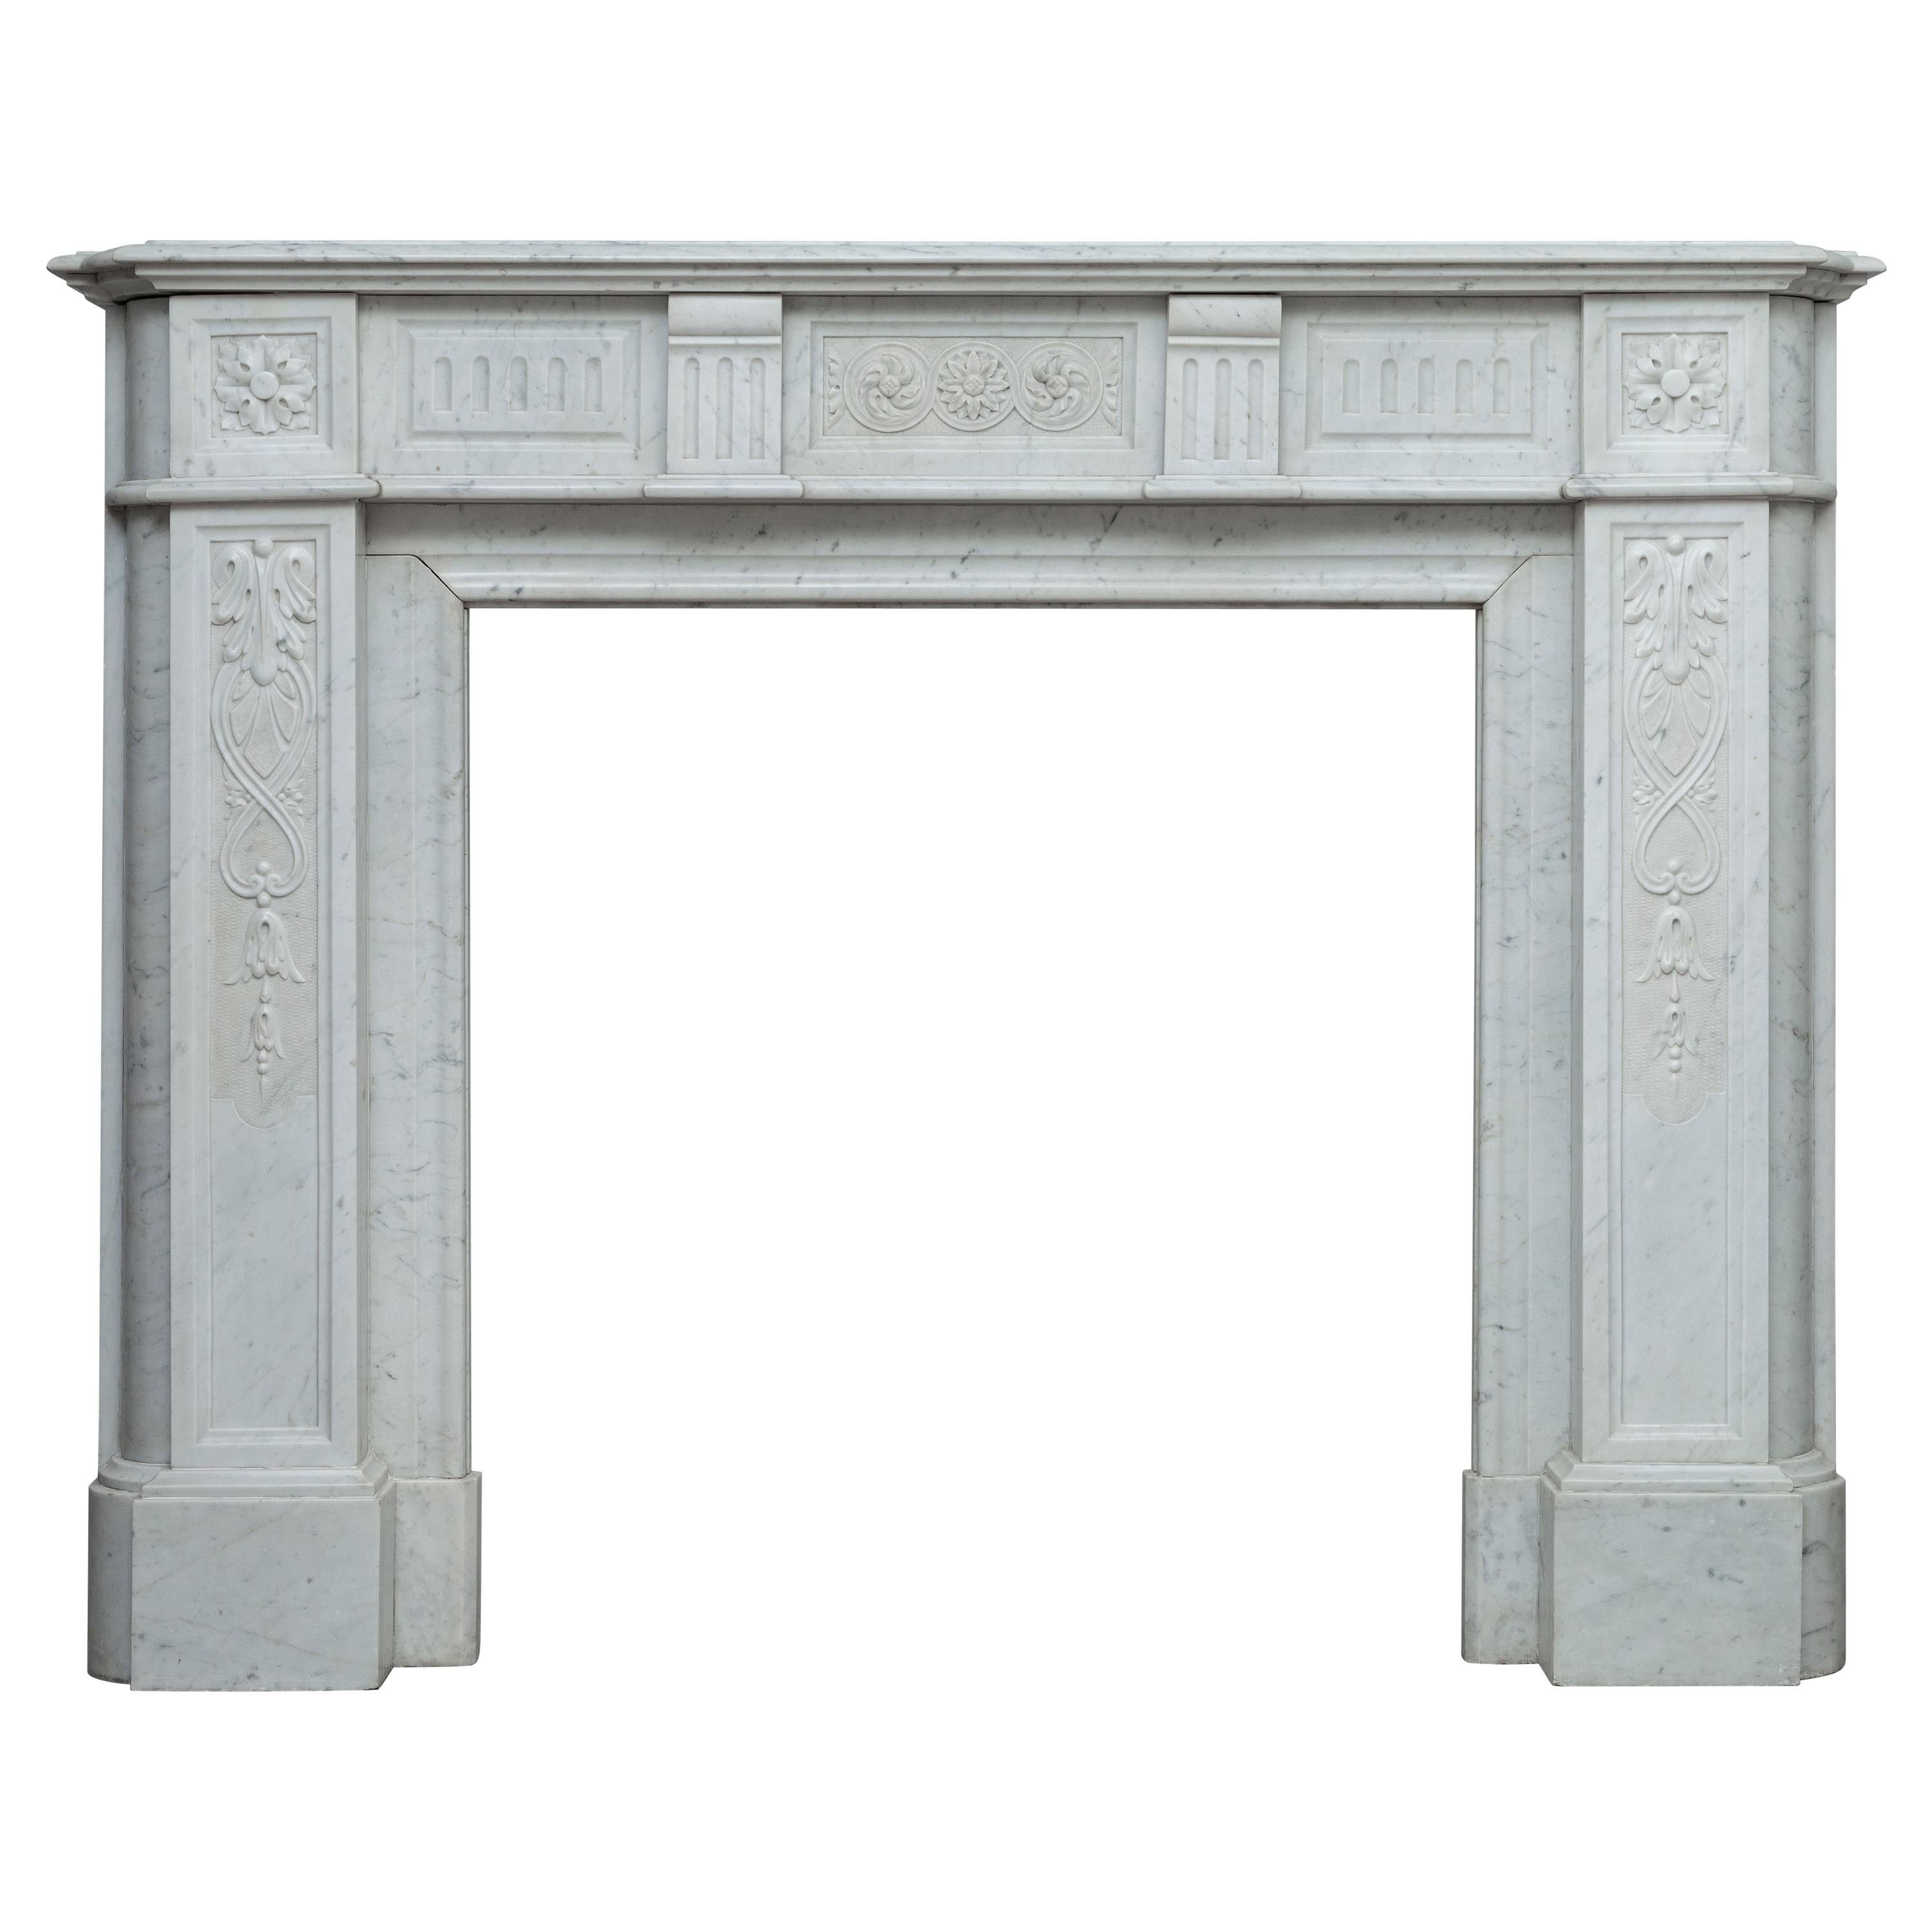 French Neoclassical White Carrara Marble Antique Fireplace